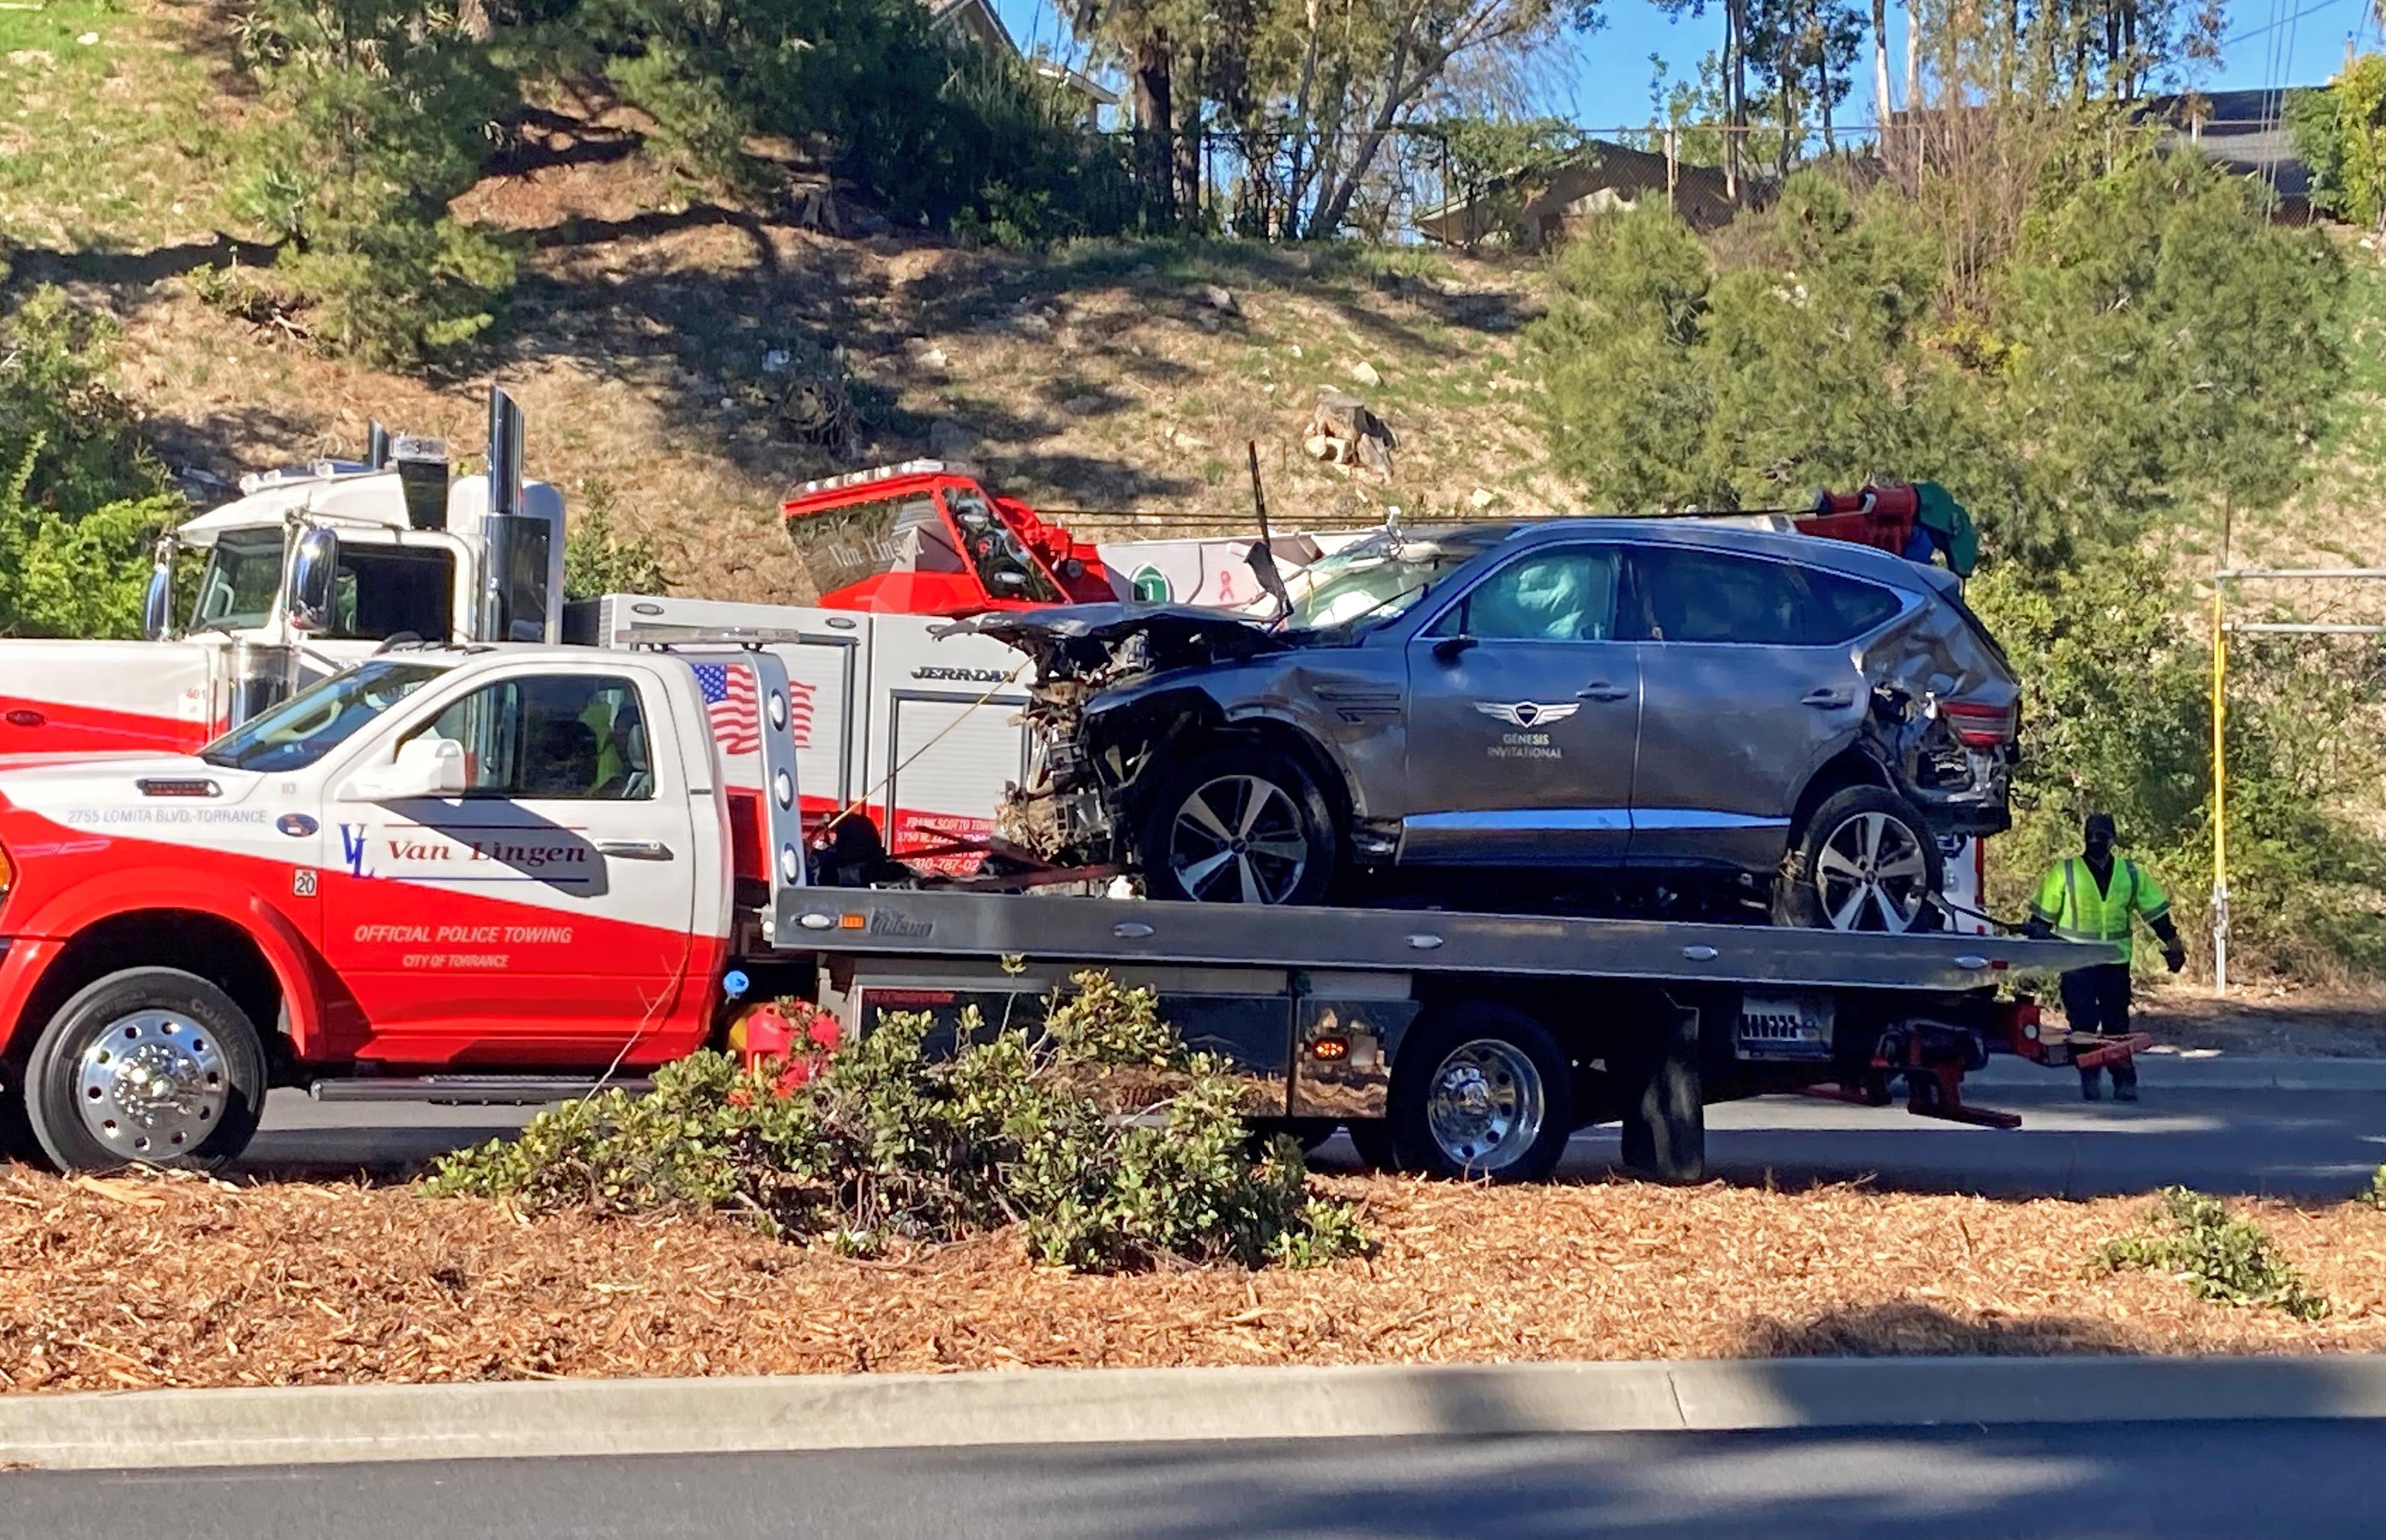 The vehicle driven by Tiger Woods on the back of a truck in Los Angeles following his crash on February 23, 2021 (Keiran Southern/PA)